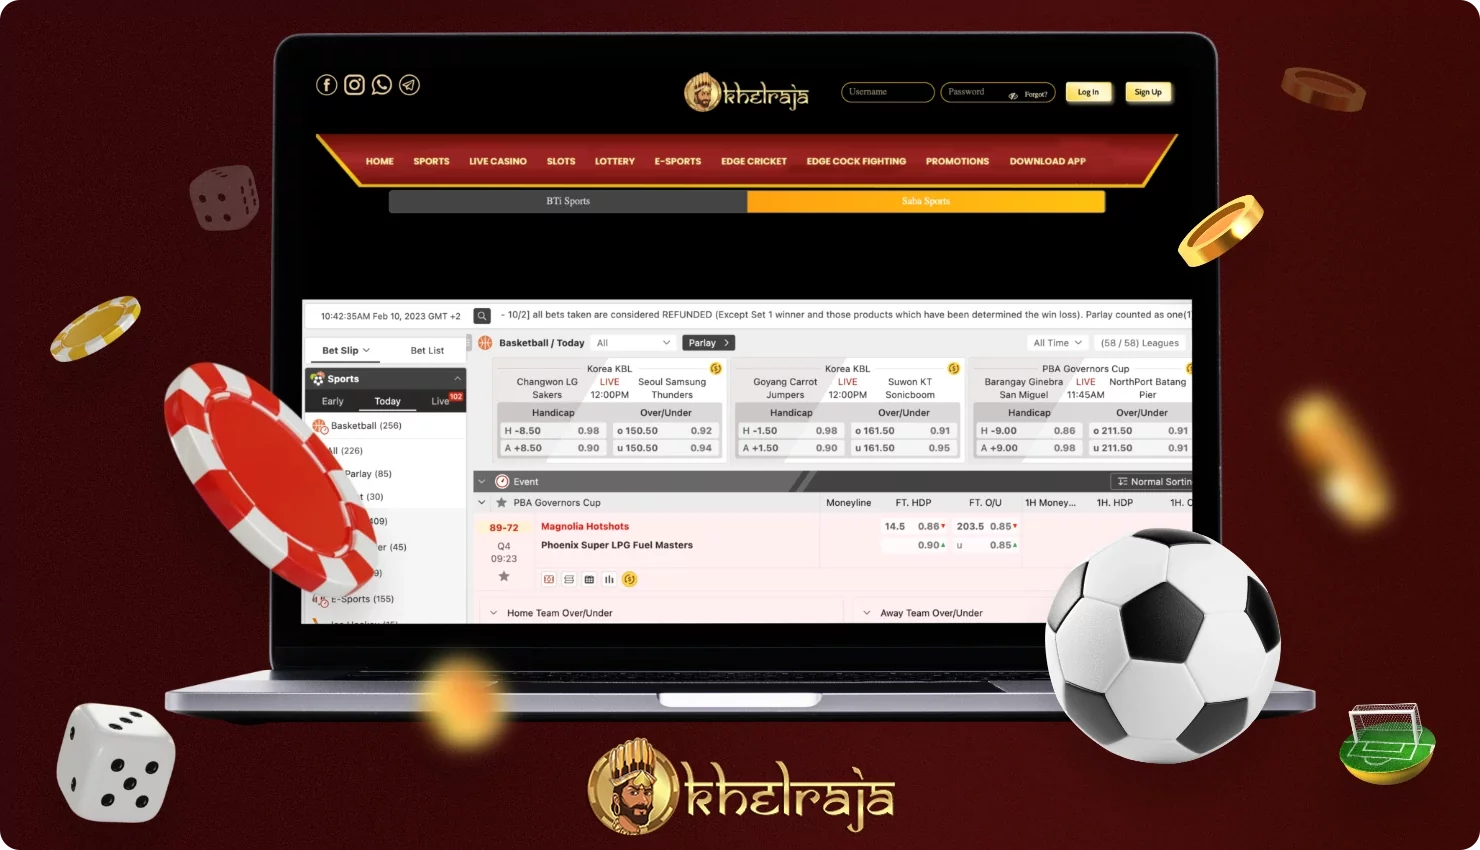 Detailed information about Khelraja for legal sports betting and casinos in India